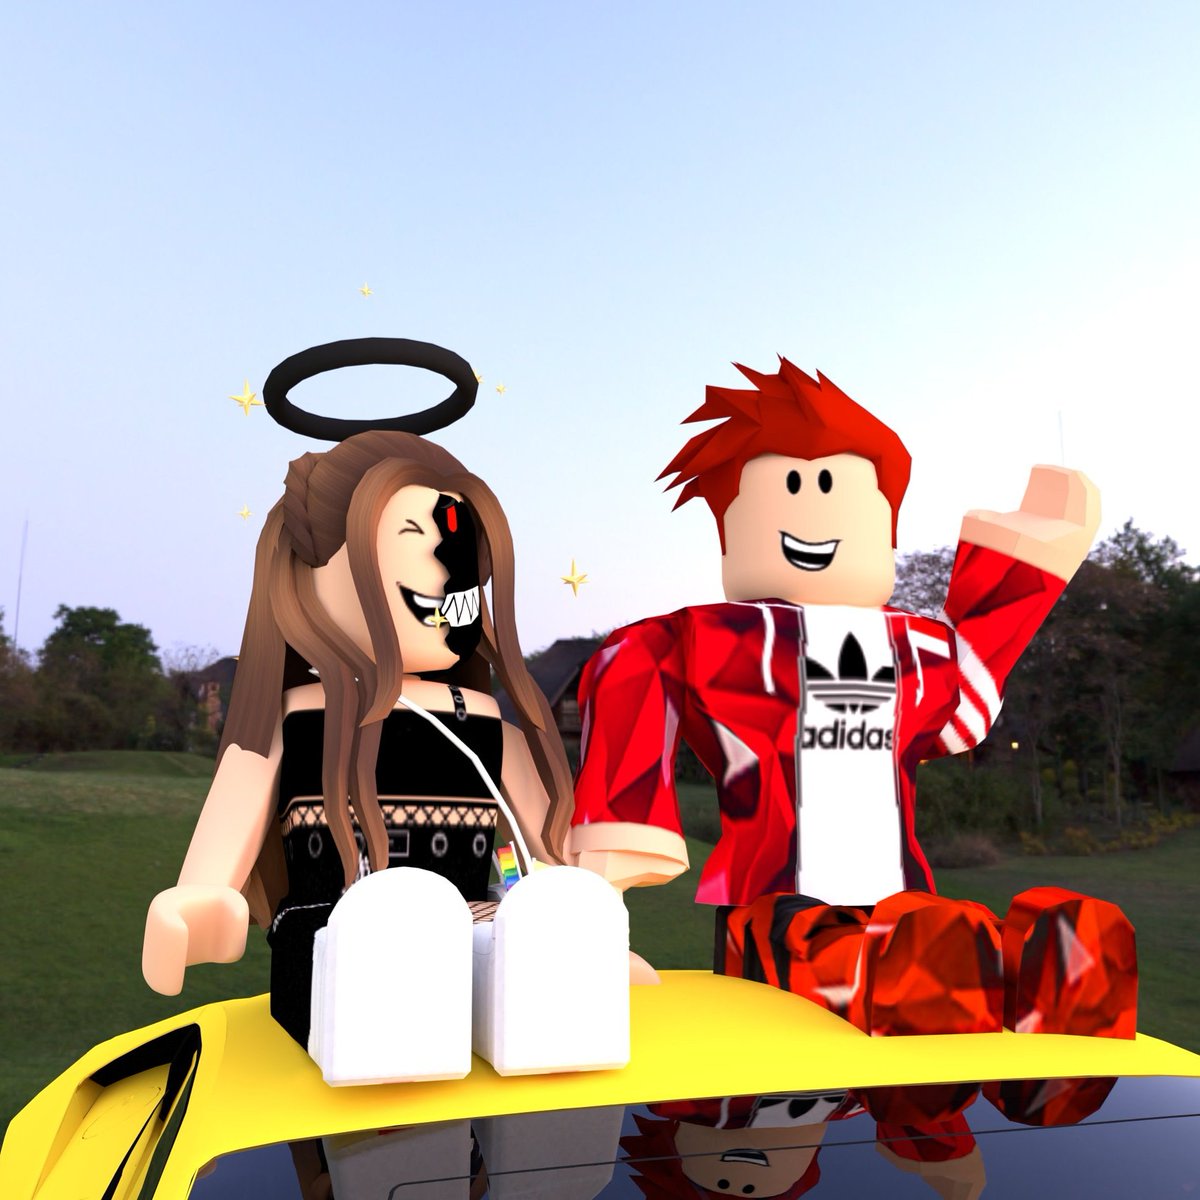 Gerboo On Twitter Hi Want A Bff Gfx Like These Comment Your Roblox User And Your Friend Or Best Friends Username I Might Make One Of You Https T Co Itx6g0yffq - aesthetic roblox character sitting